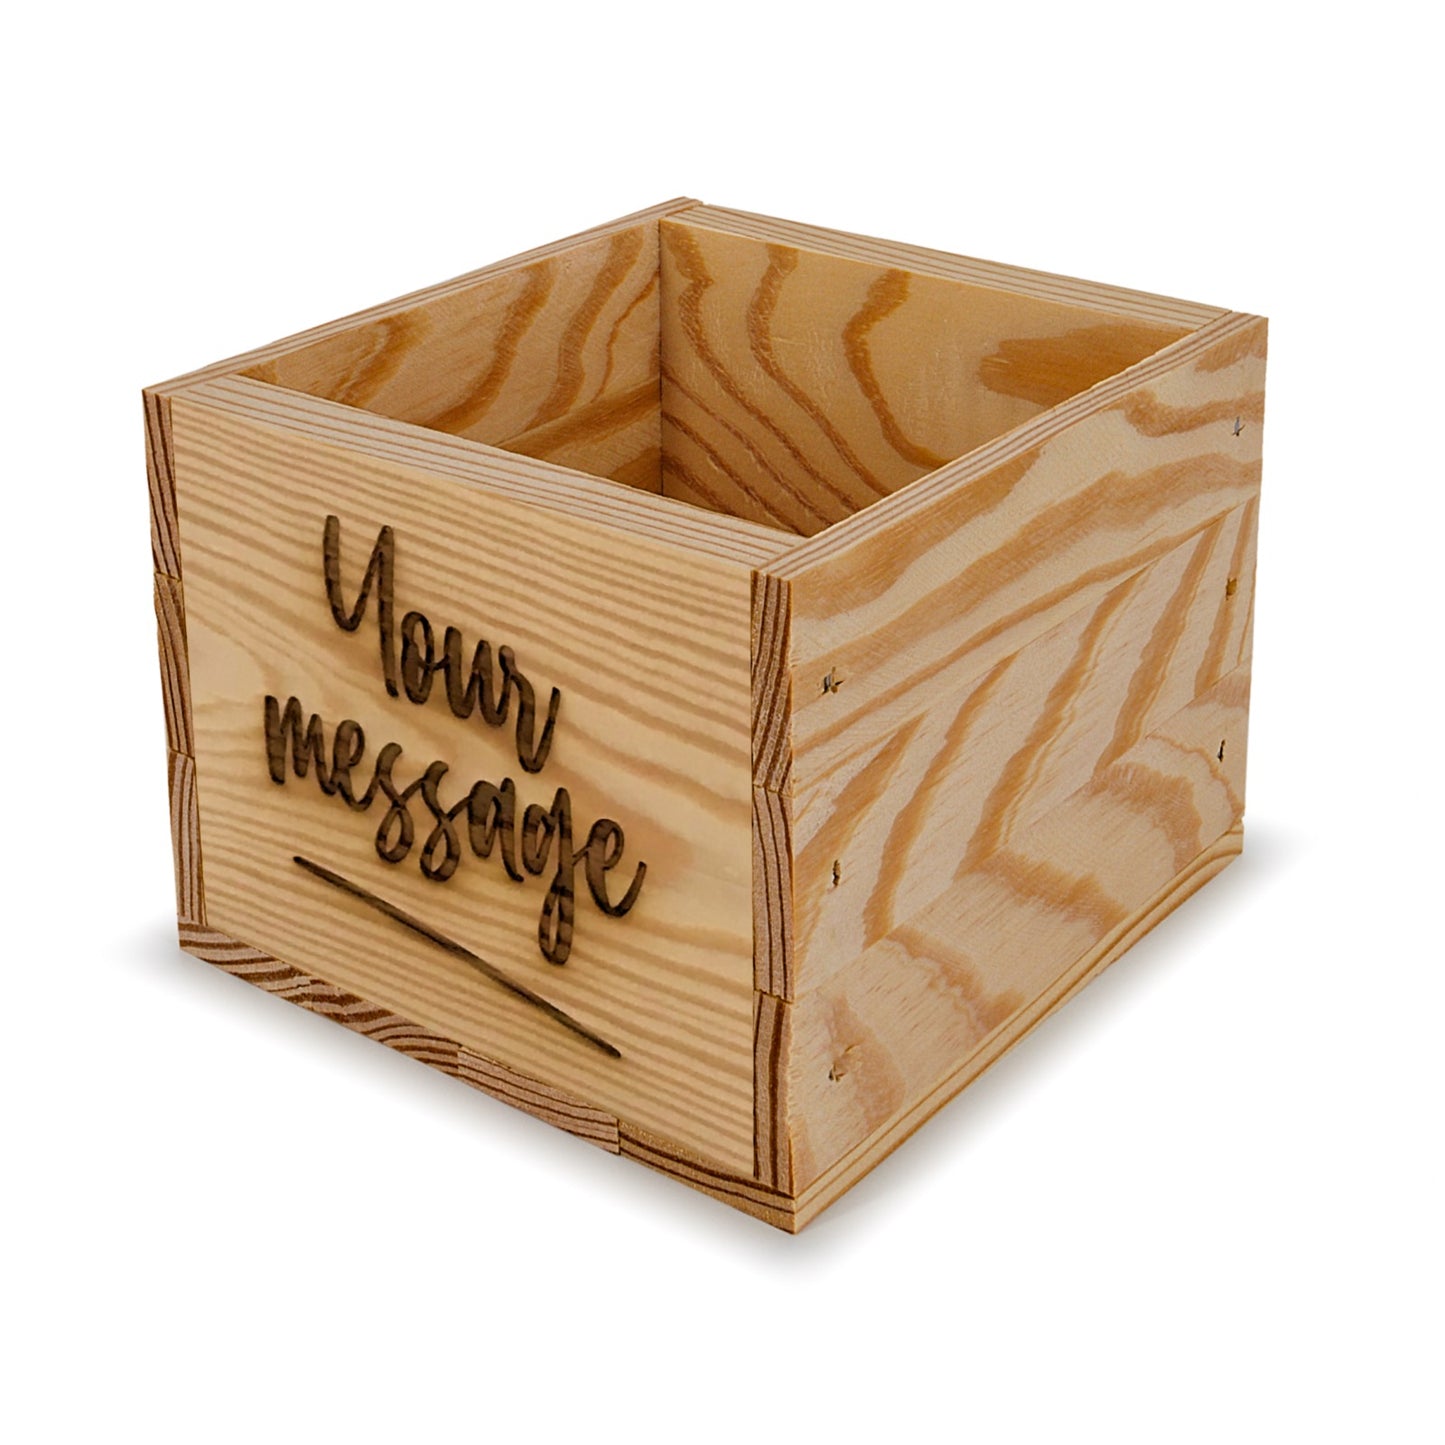 Small wooden crate with custom message 6x6.25x5.25, 6-BX-6-6.25-5.25-ST-NW-NL, 12-BX-6-6.25-5.25-ST-NW-NL, 24-BX-6-6.25-5.25-ST-NW-NL, 48-BX-6-6.25-5.25-ST-NW-NL, 96-BX-6-6.25-5.25-ST-NW-NL